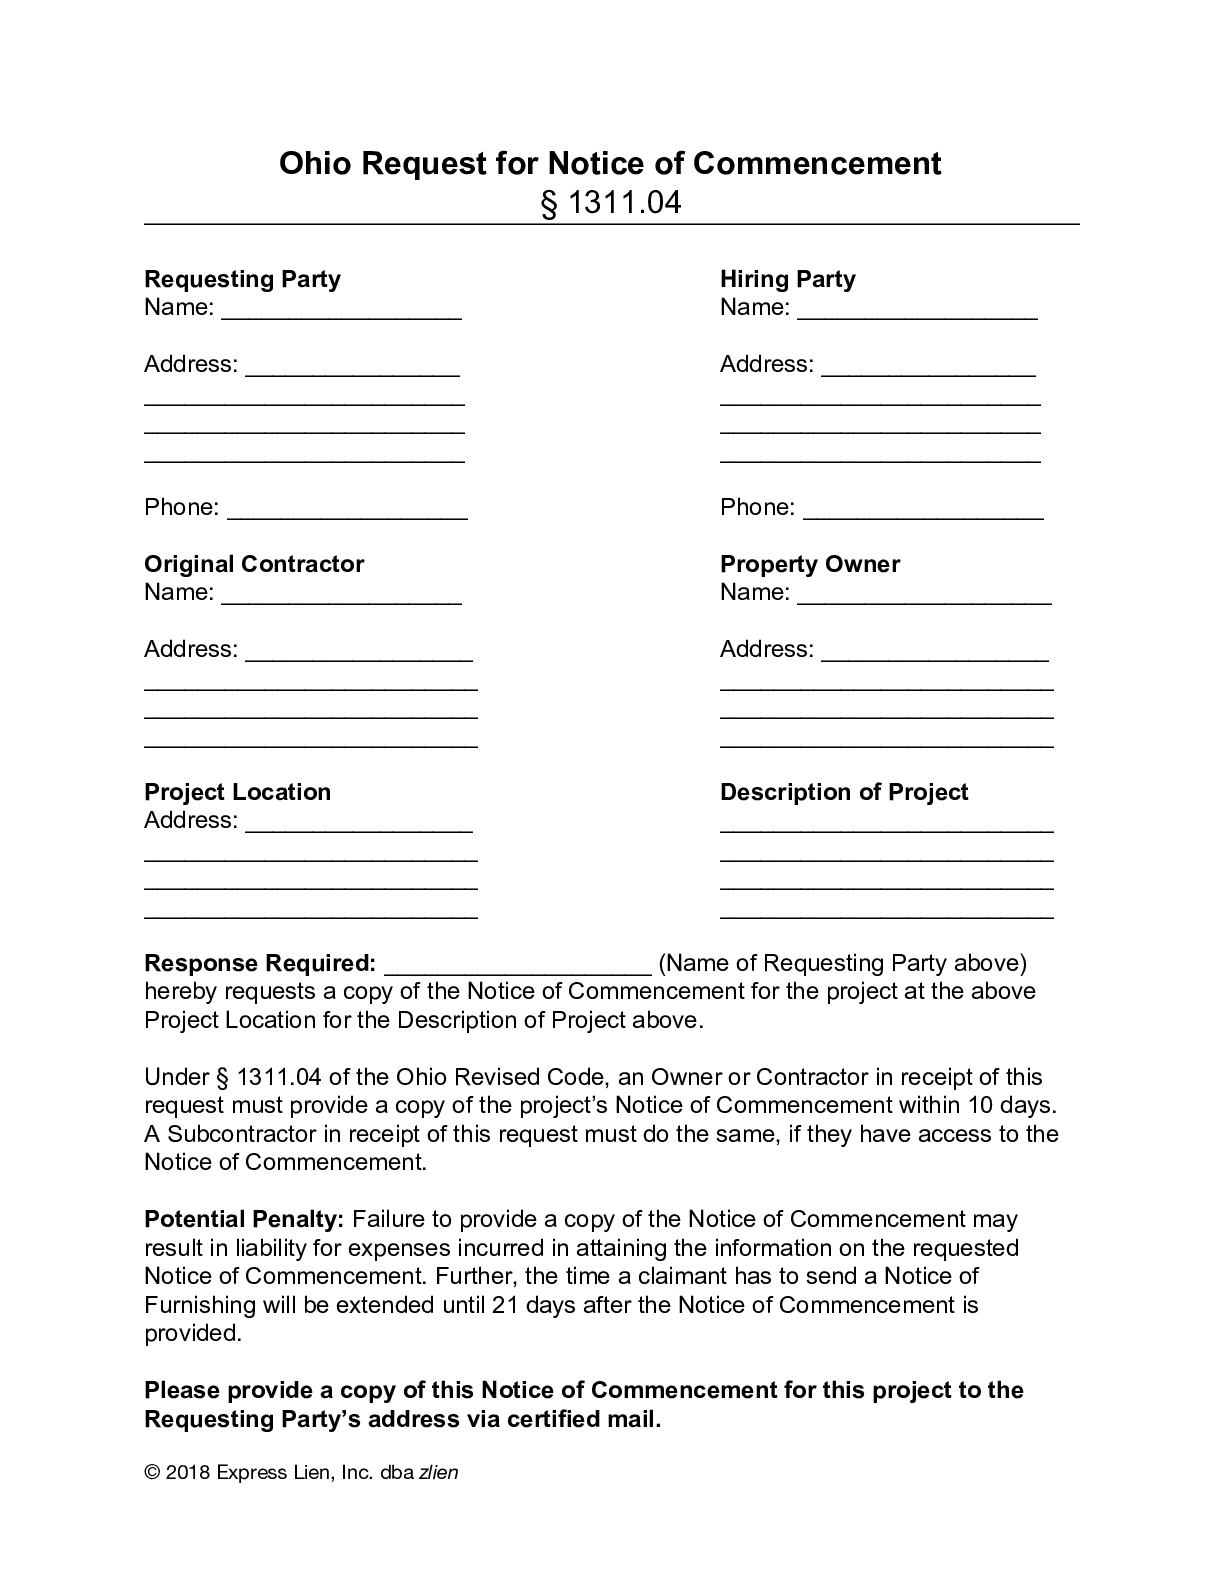 Ohio Request for Notice of Commencement Form